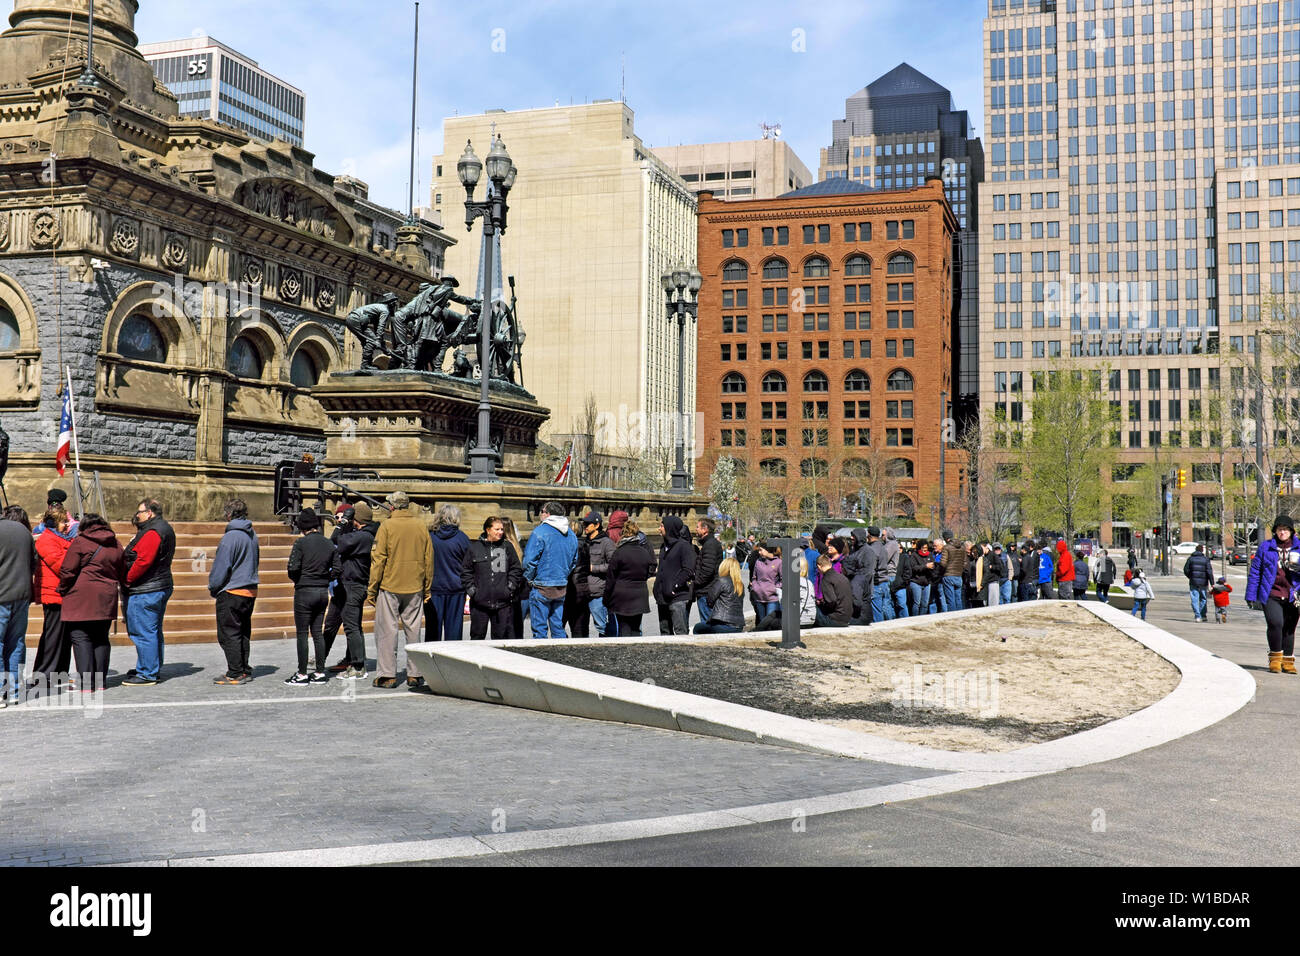 Visitors to downtown Public Square in Cleveland, Ohio wait in line to tour the Soldiers and Sailors Monument on April 27, 2019. Stock Photo